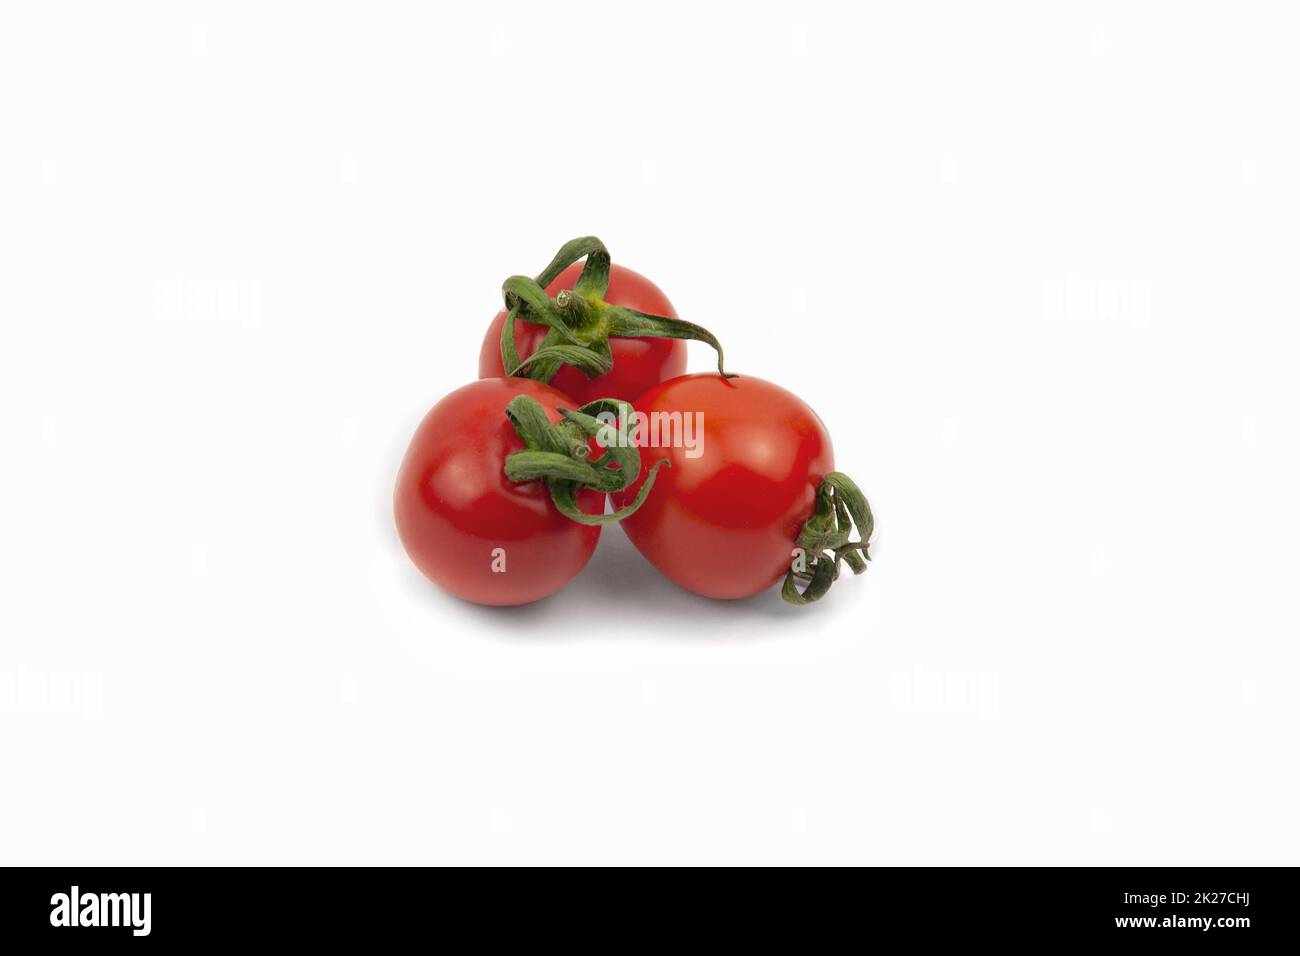 three red cherry tomato , datterino type isolated on white, copy space Stock Photo